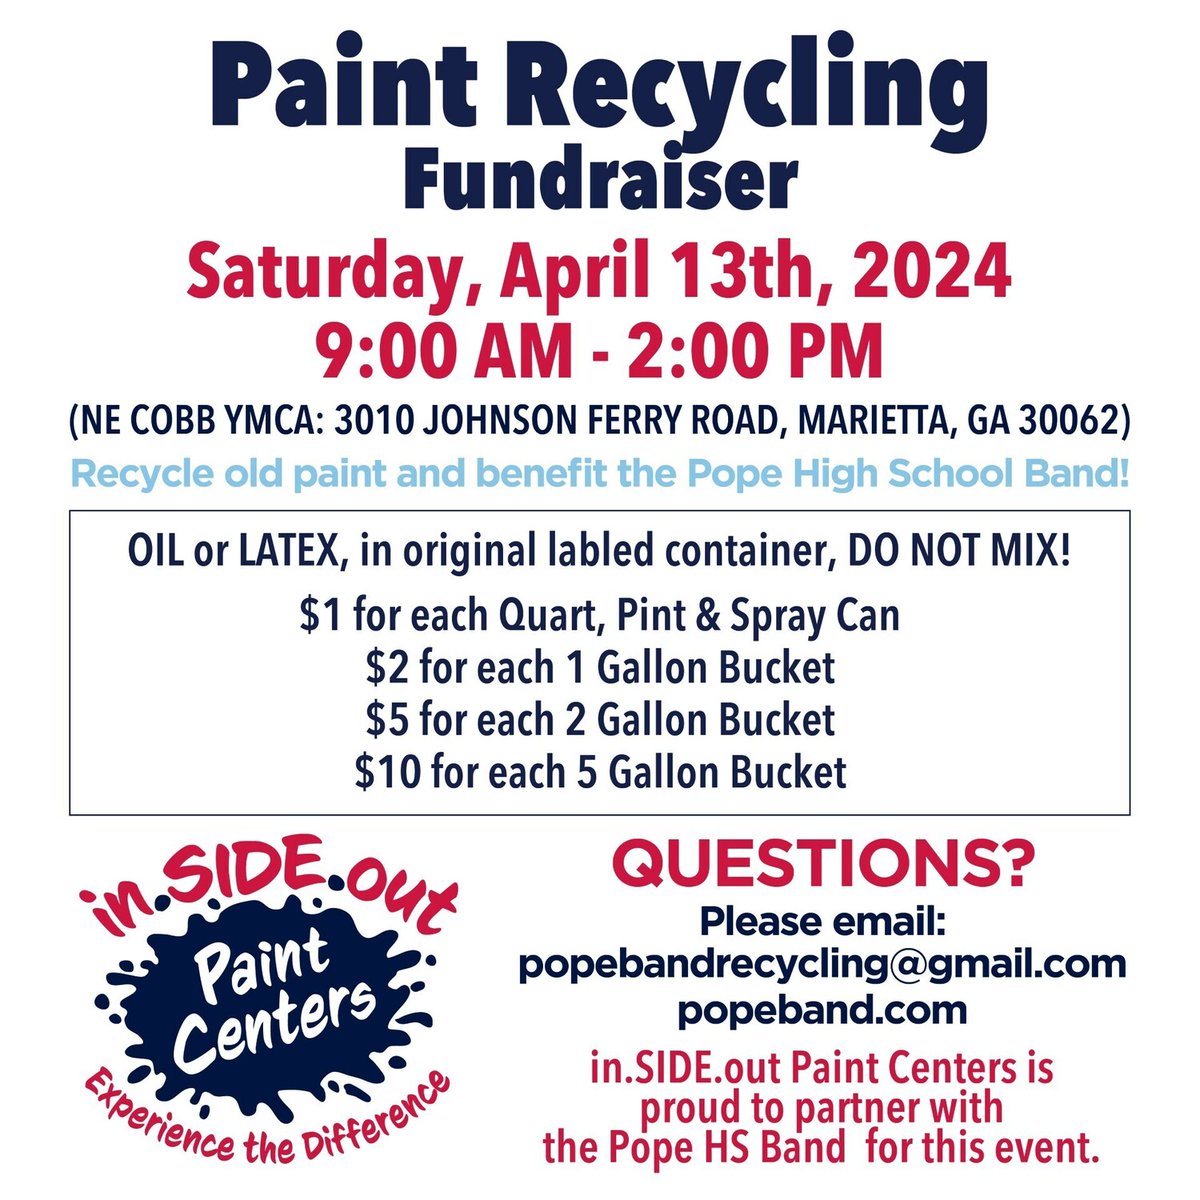 Our next recycling event is just a week away.
Each gallon of paint helps us make life more colorful in underserved communities around the world
#GlobalPaintforCharity #insideoutpaintcenters
#popeband #earthday2024
 #corporateresponsibility #volunteer #communityimpact